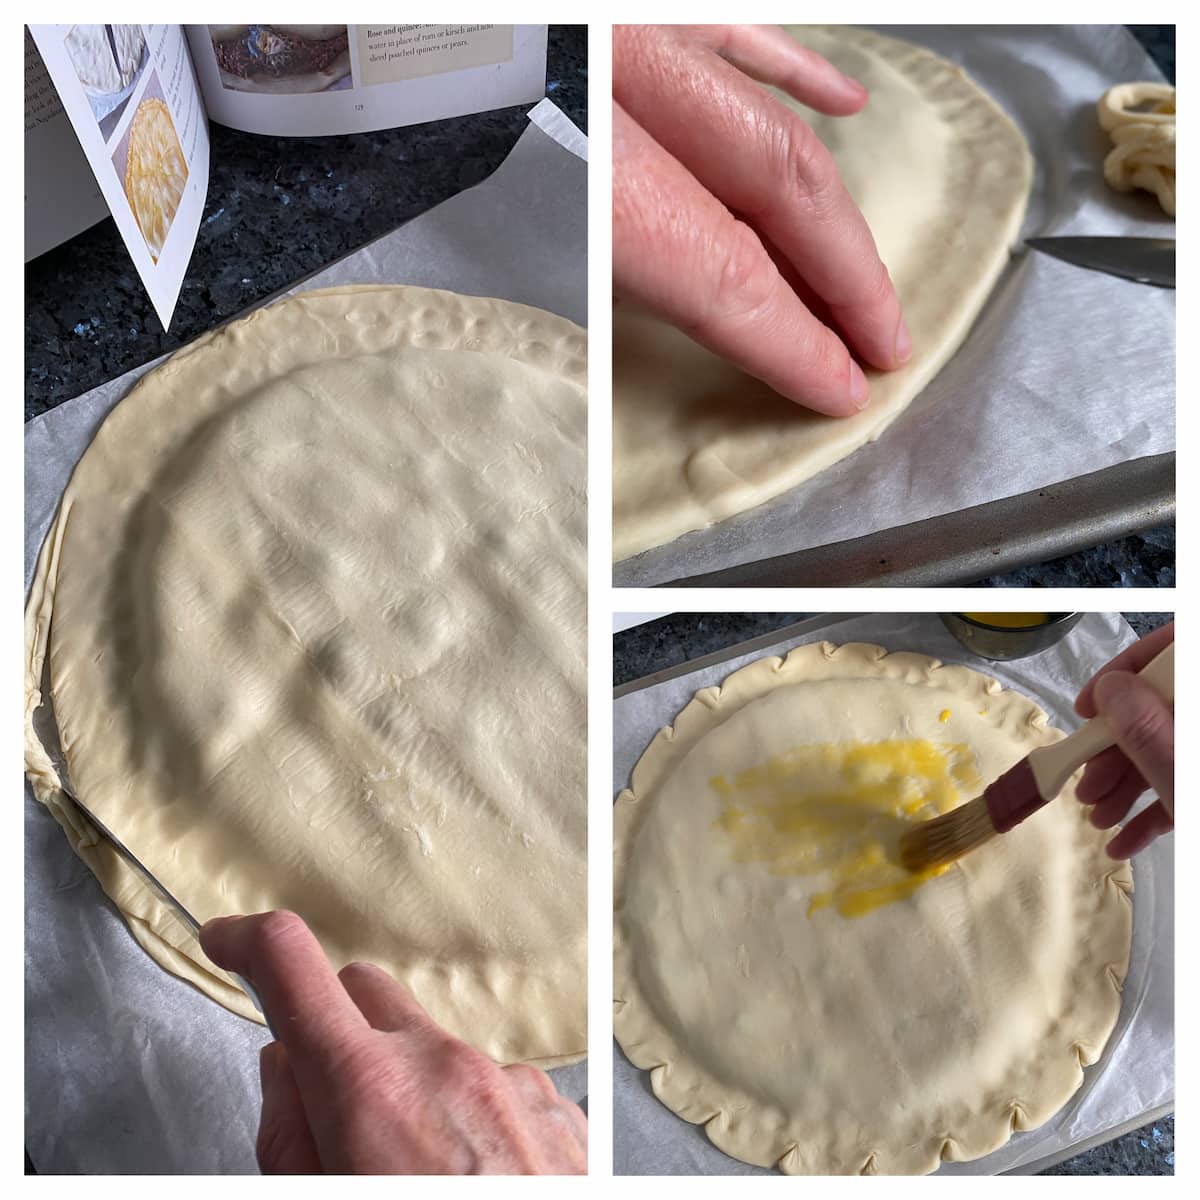 sealing the puff pastry border with indents and glaze with egg yolk